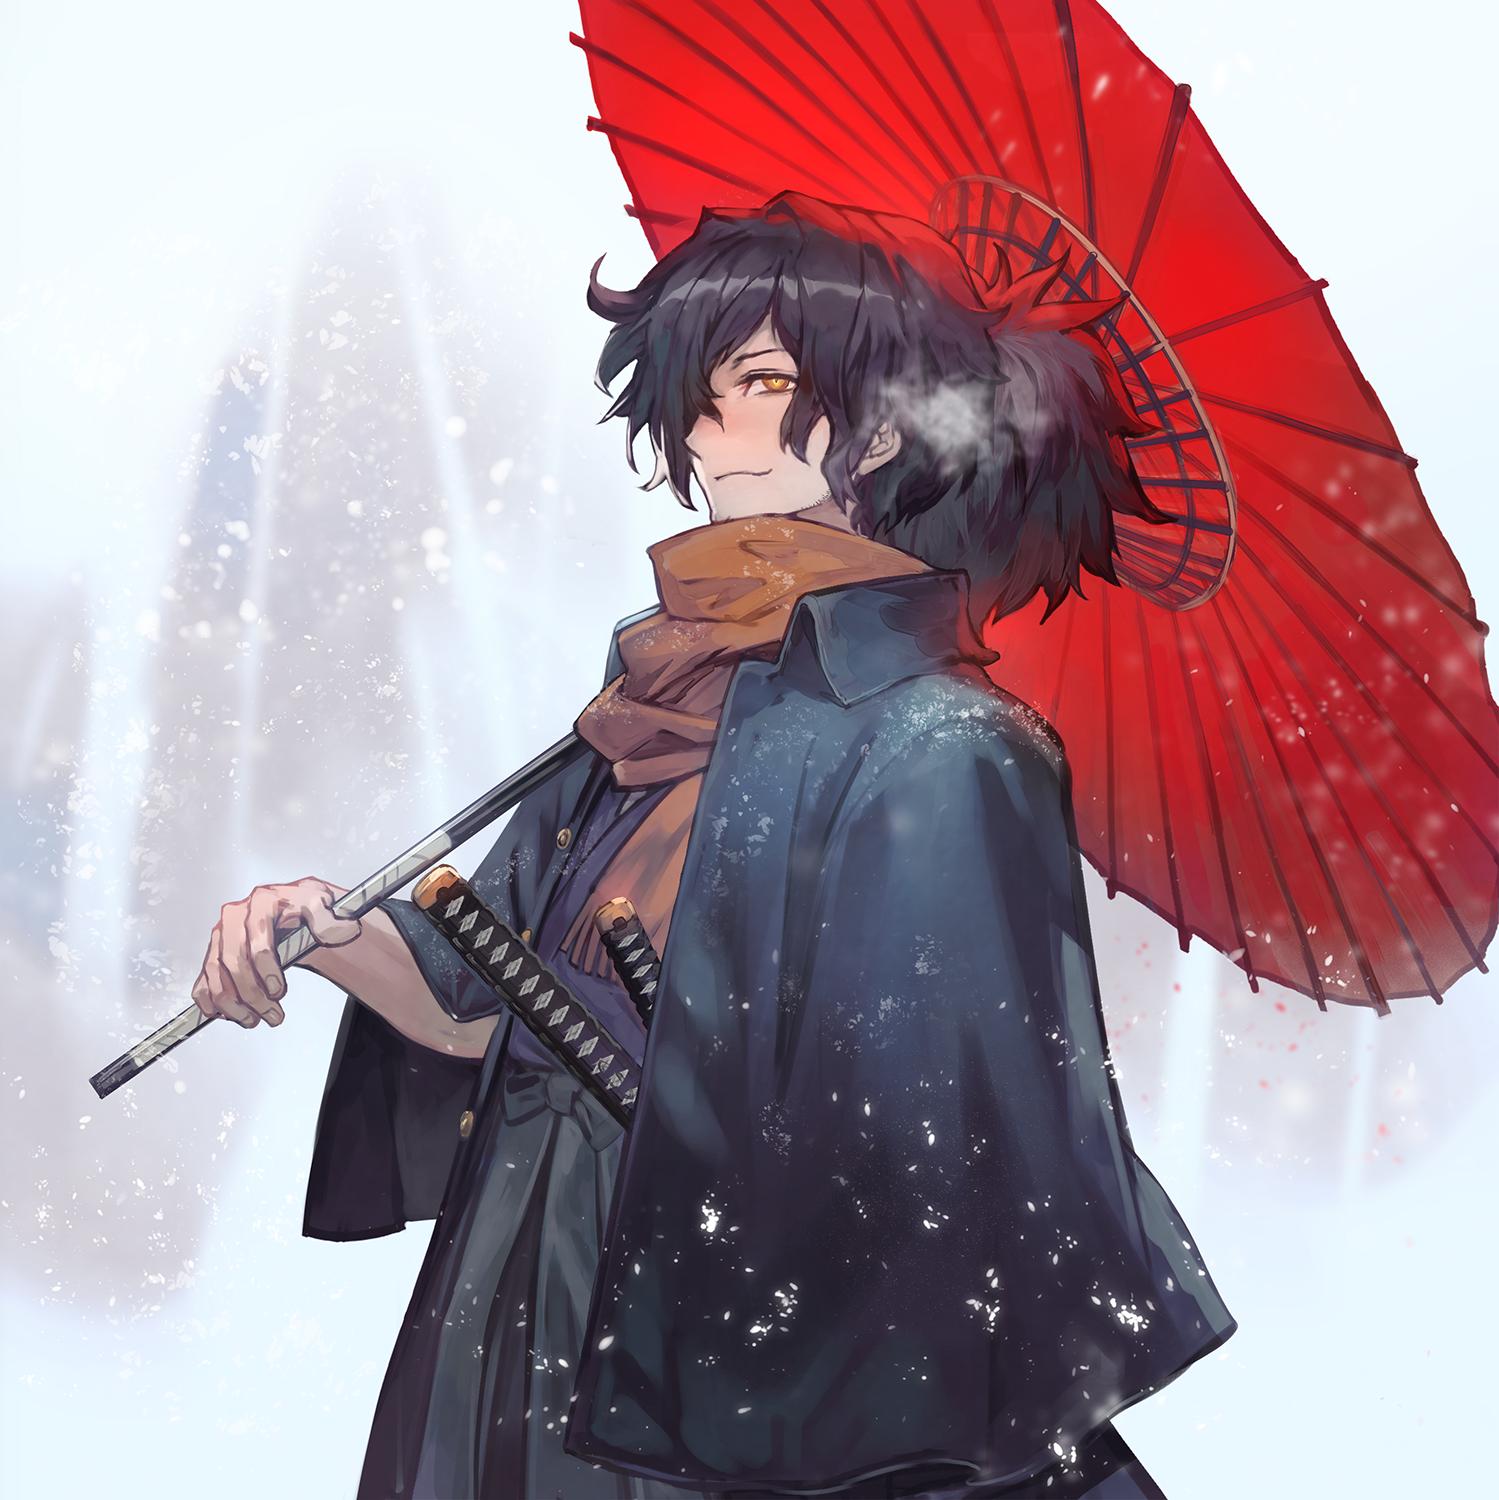 1boy bangs black_hair black_kimono buttons commentary commentary_request fate/grand_order fate_(series) fog hair_over_one_eye hakama haori highres holding holding_umbrella japanese_clothes katana kimono lack light long_sleeves looking_at_viewer male_focus multiple_swords okada_izou_(fate) orange_scarf ponytail red_umbrella scarf sheath sheathed smile snow solo sword umbrella upper_body weapon yellow_eyes